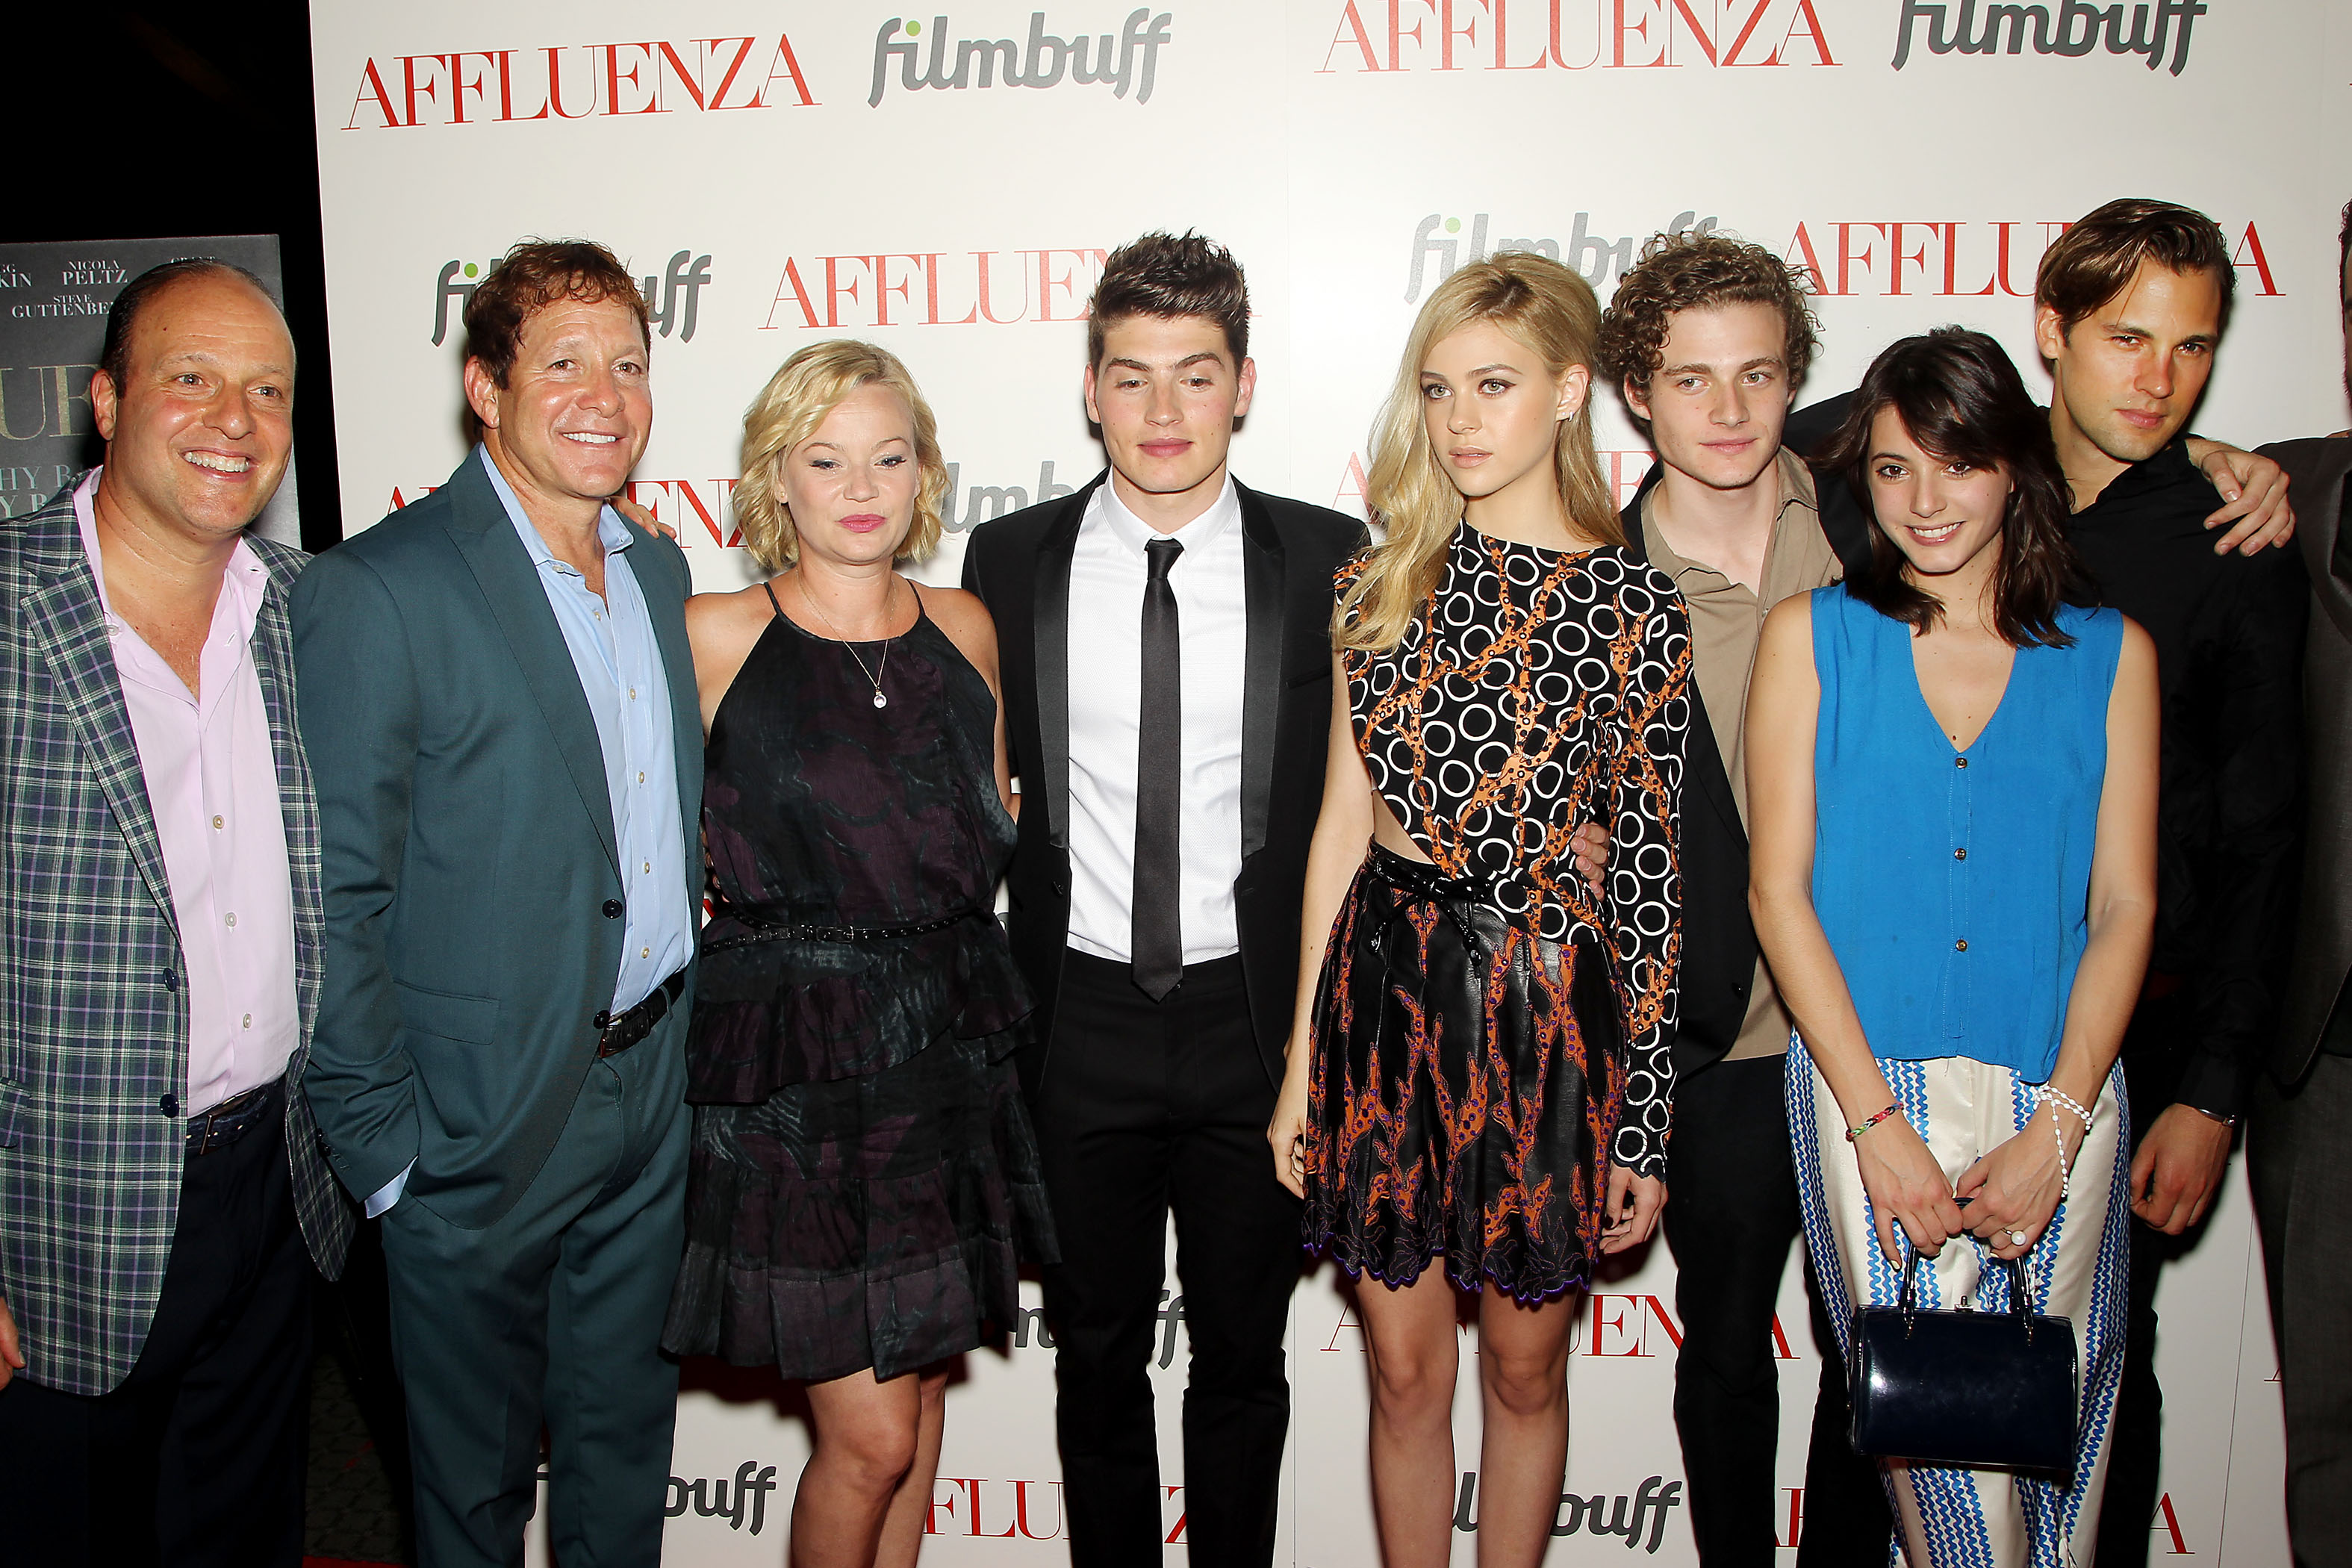 Morris S. Levy with the cast of the film Affluenza at the premiere.